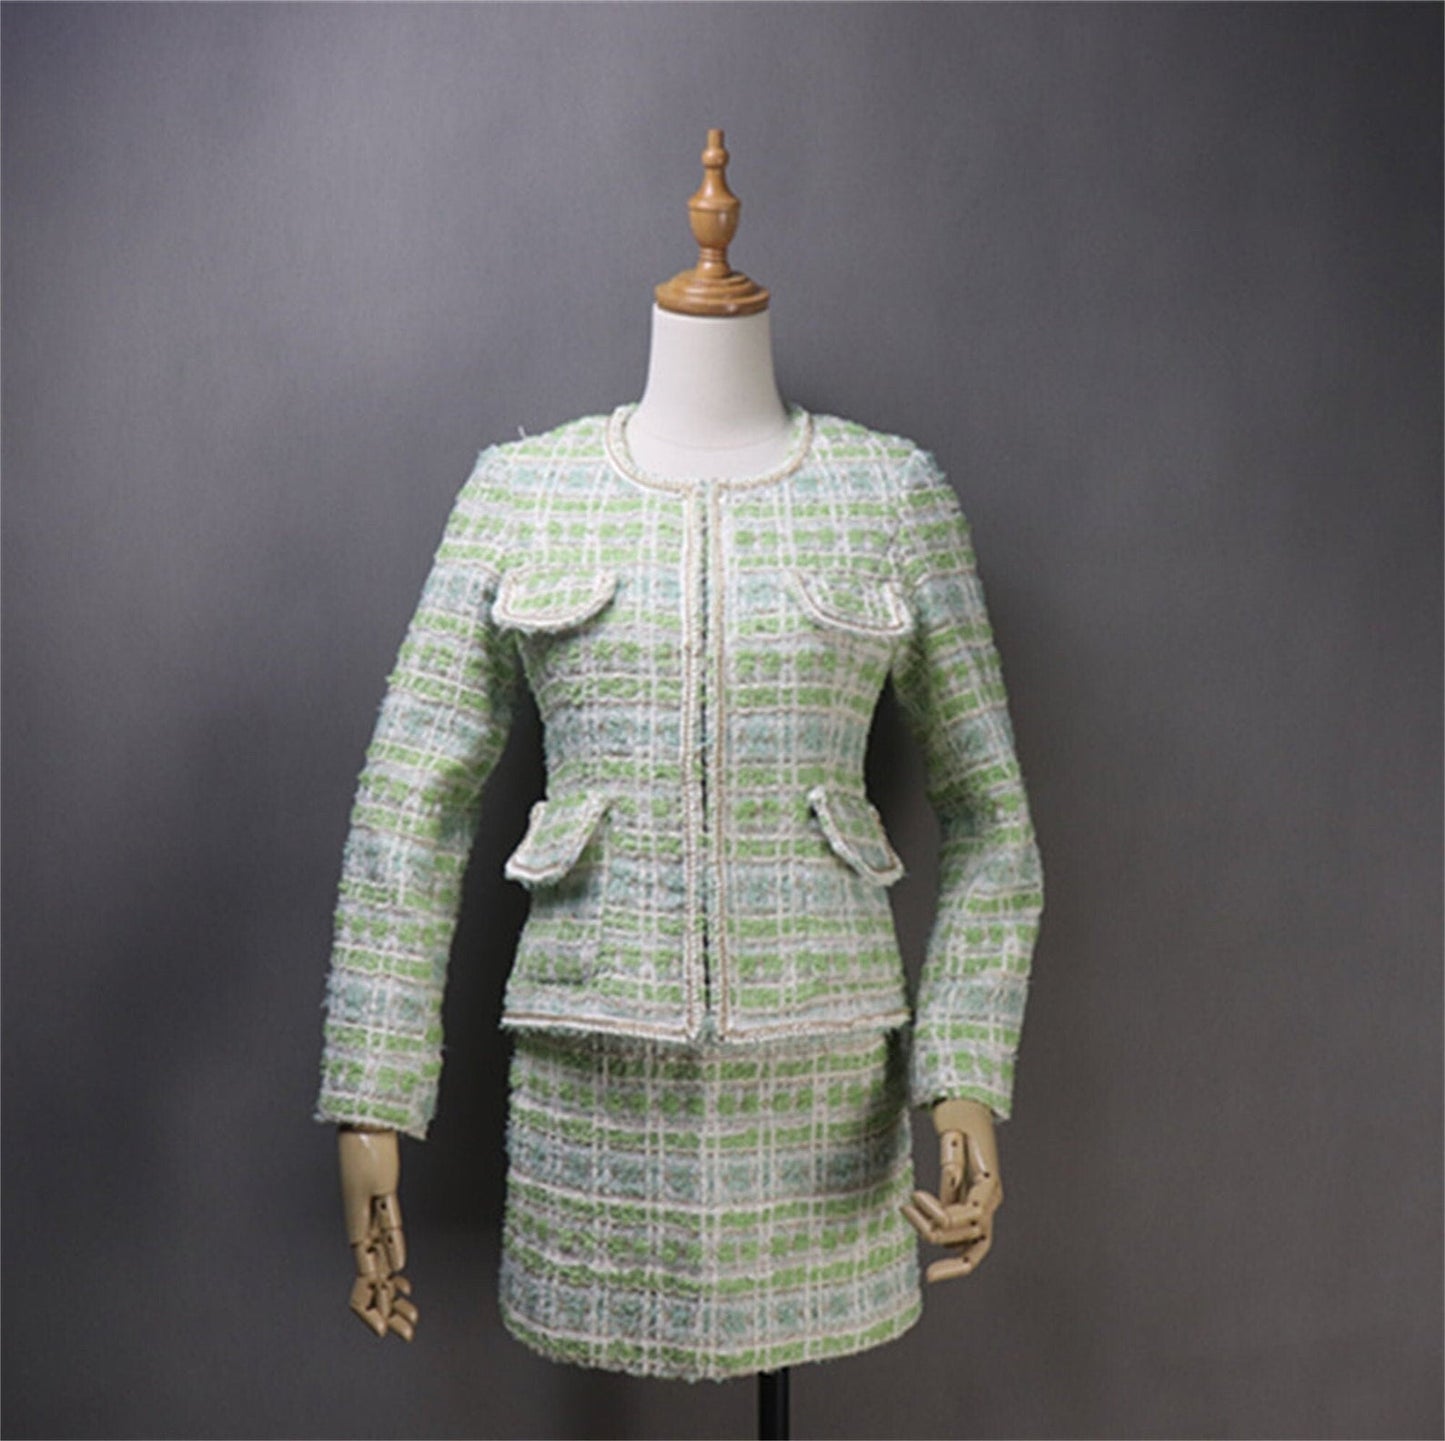 Green Tweed Jacket Coat Blazer with Chain Decor for Women CUSTOM MADE Sequinned vintage Buckle Jacket   UK CUSTOMER SERVICE! Green Tweed Jacket Coat Blazer with Chain Decor for Women CUSTOM MADE  -We offer Shorts/ Skirts/ Trousers/Blazer for the suit.  All items are made to order with very experienced tailors. Please advise your height, weight and body measurements ( Bust, shoulder, Sleeves, Waist and Length etc). Our tailors will make the order for you!  Materials: Tweed